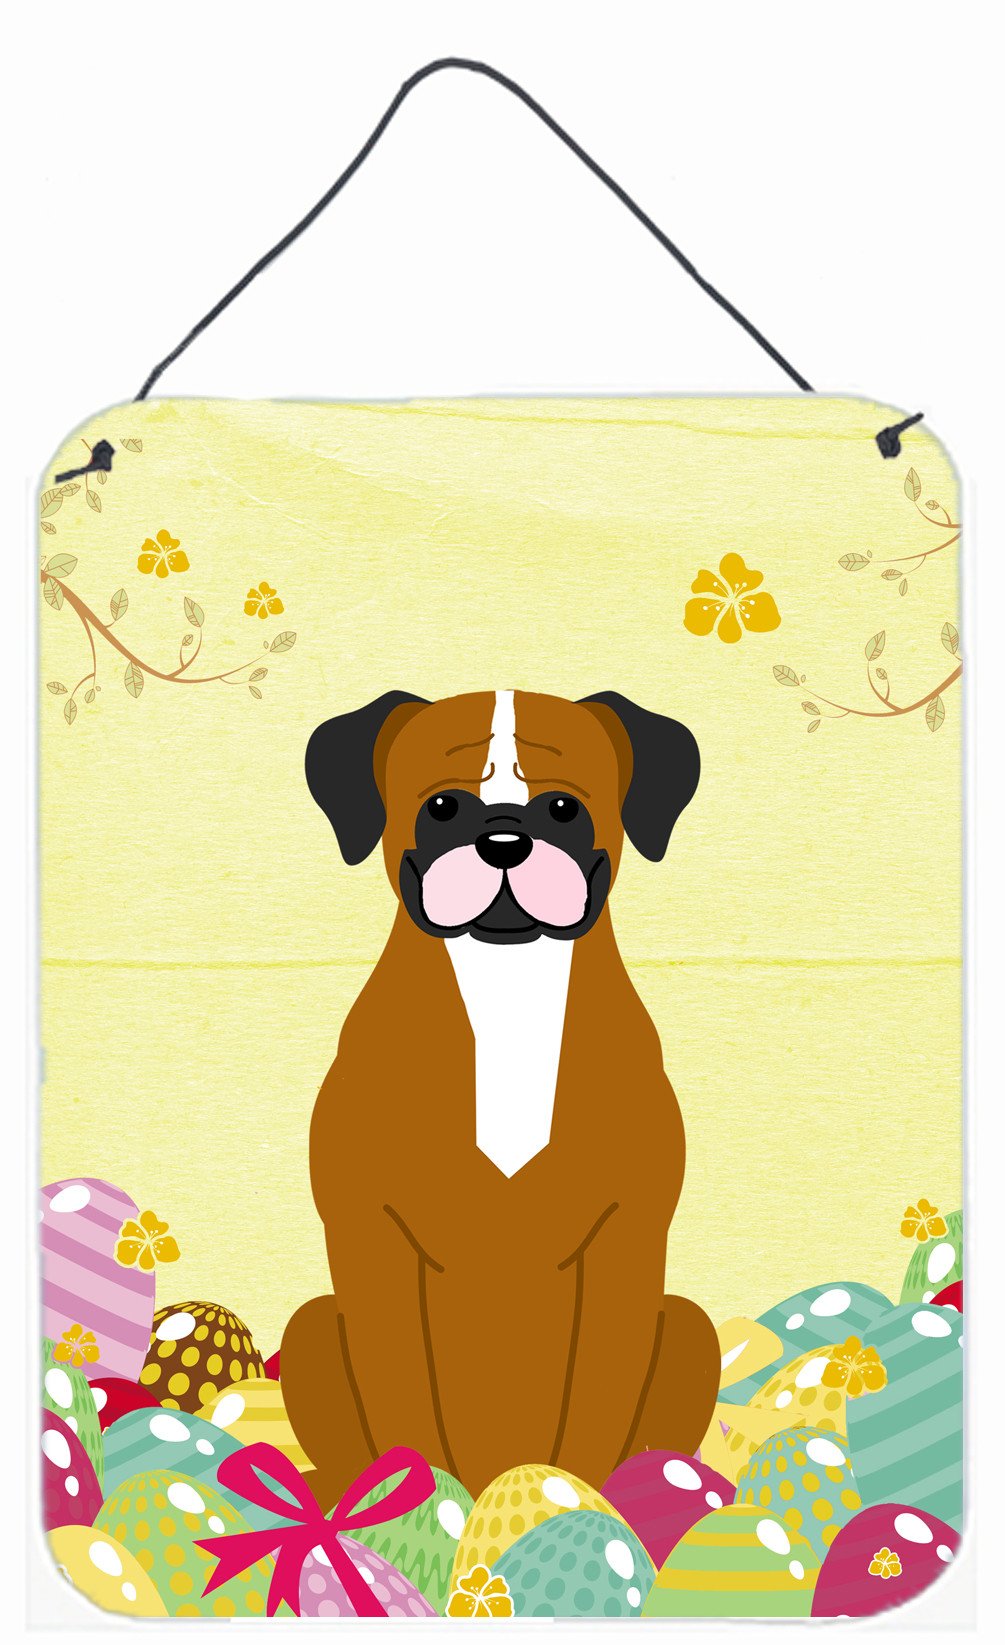 Easter Eggs Flashy Fawn Boxer Wall or Door Hanging Prints BB6116DS1216 by Caroline's Treasures